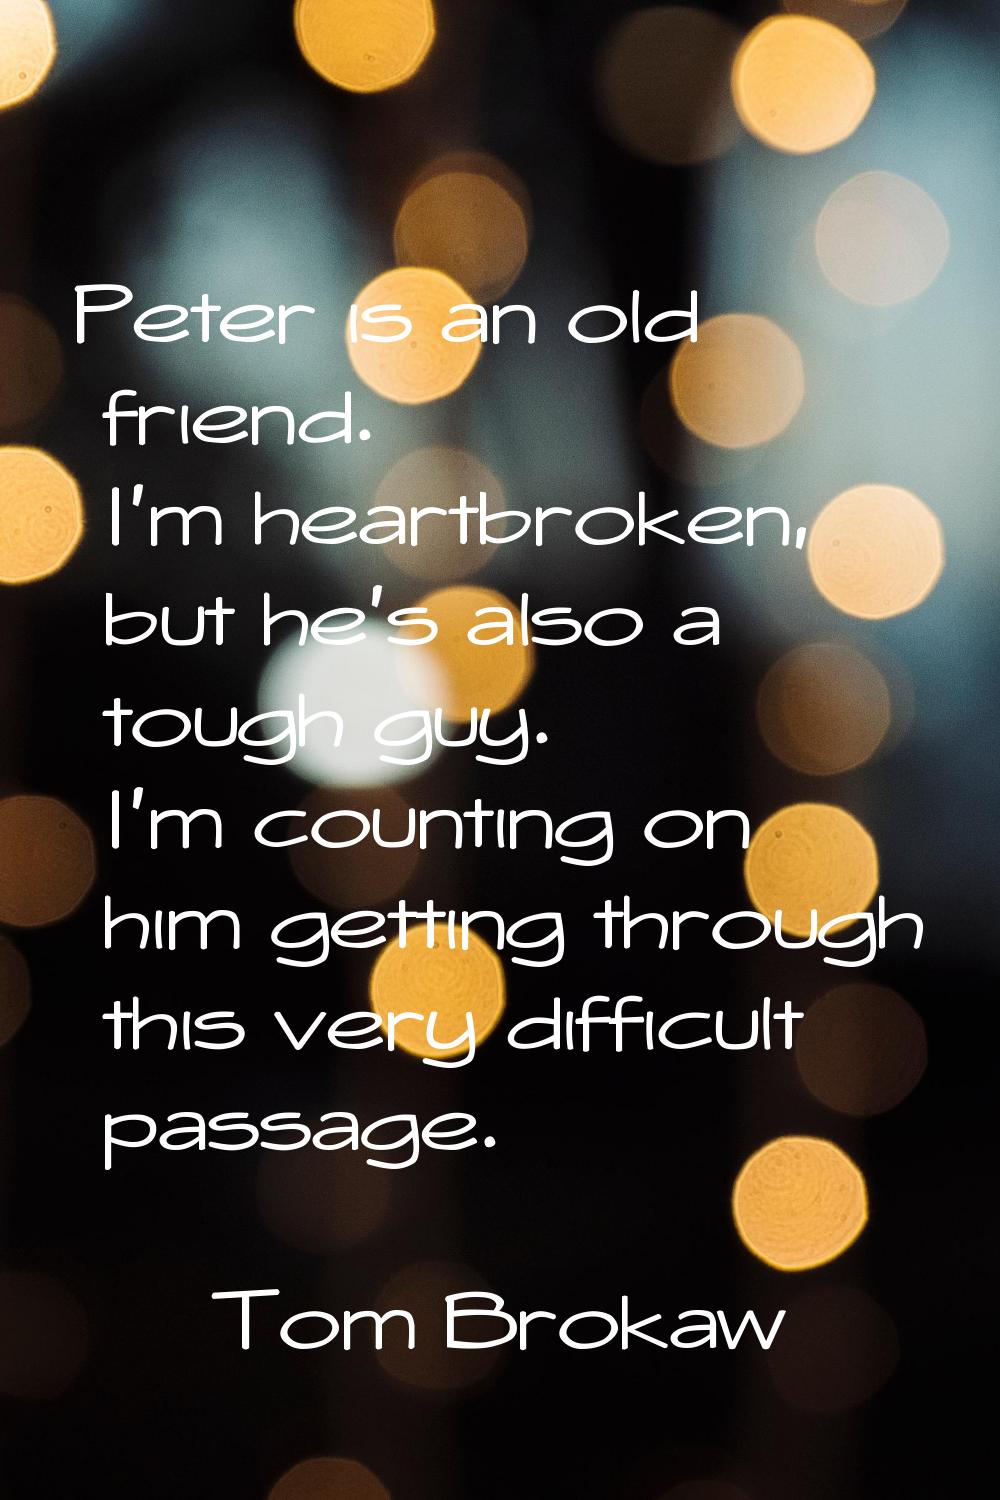 Peter is an old friend. I'm heartbroken, but he's also a tough guy. I'm counting on him getting thr